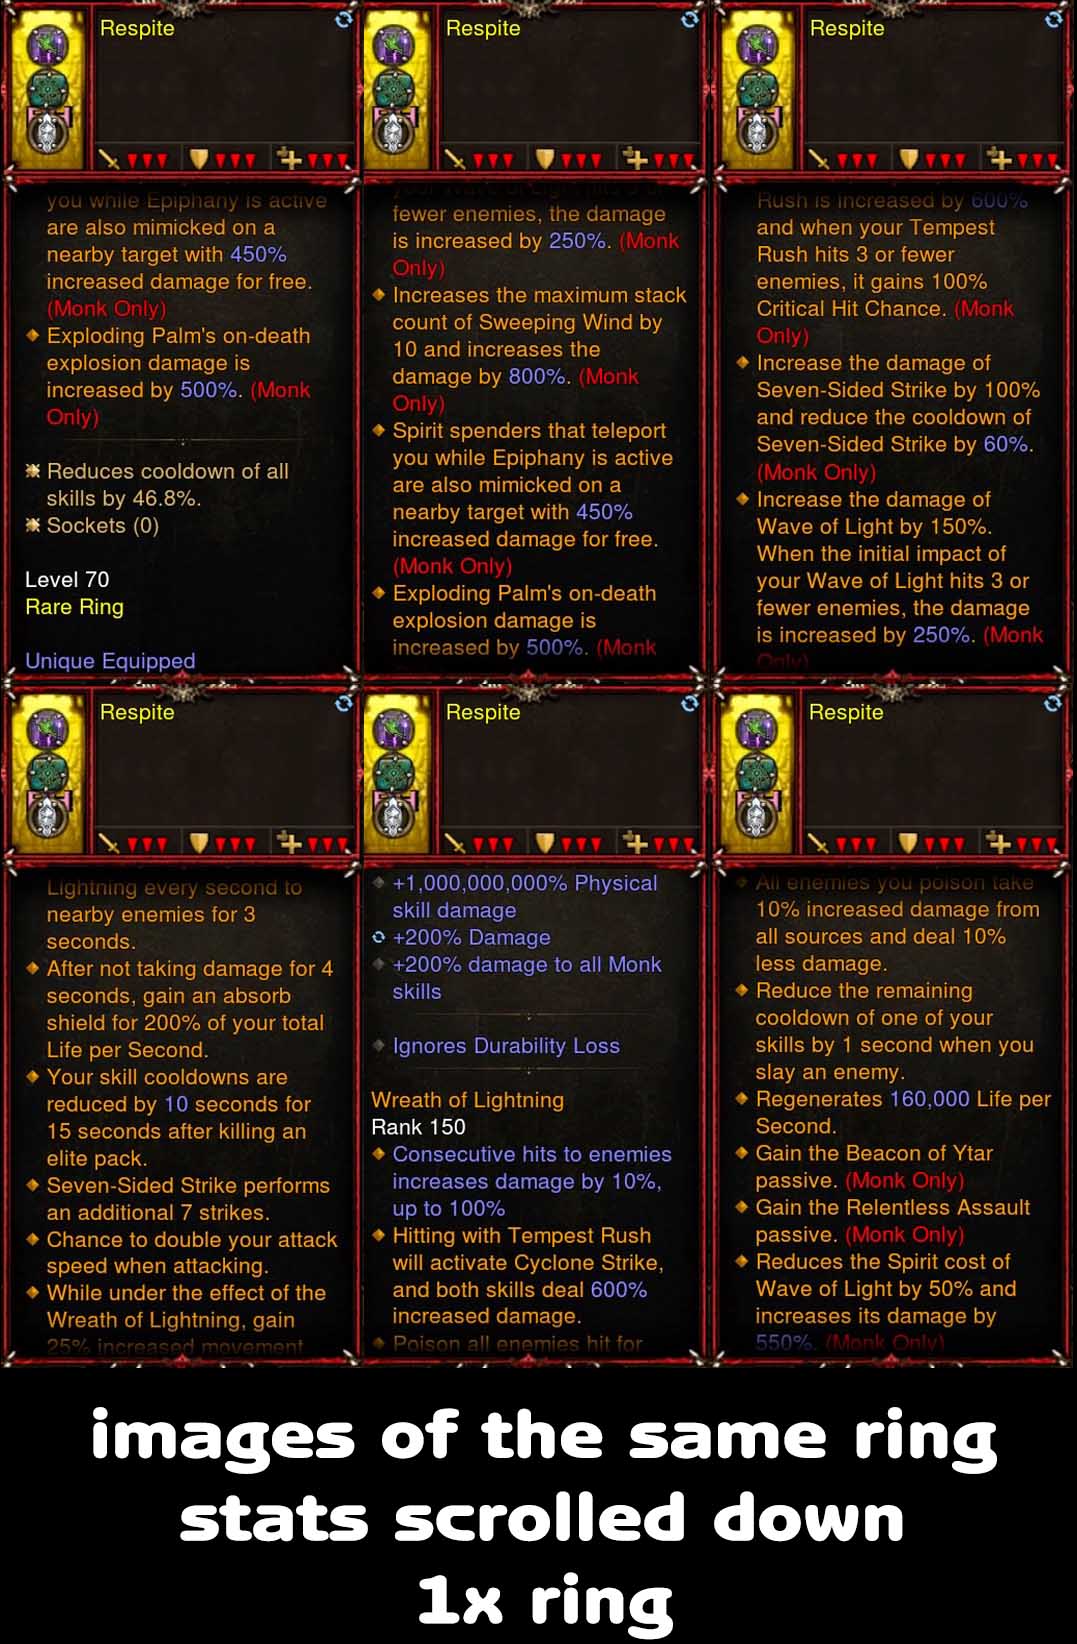 [Primal-Ethereal Infused] Legendary Affixes 100000000% Ring for Monk Respite Diablo 3 Mods ROS Seasonal and Non Seasonal Save Mod - Modded Items and Gear - Hacks - Cheats - Trainers for Playstation 4 - Playstation 5 - Nintendo Switch - Xbox One